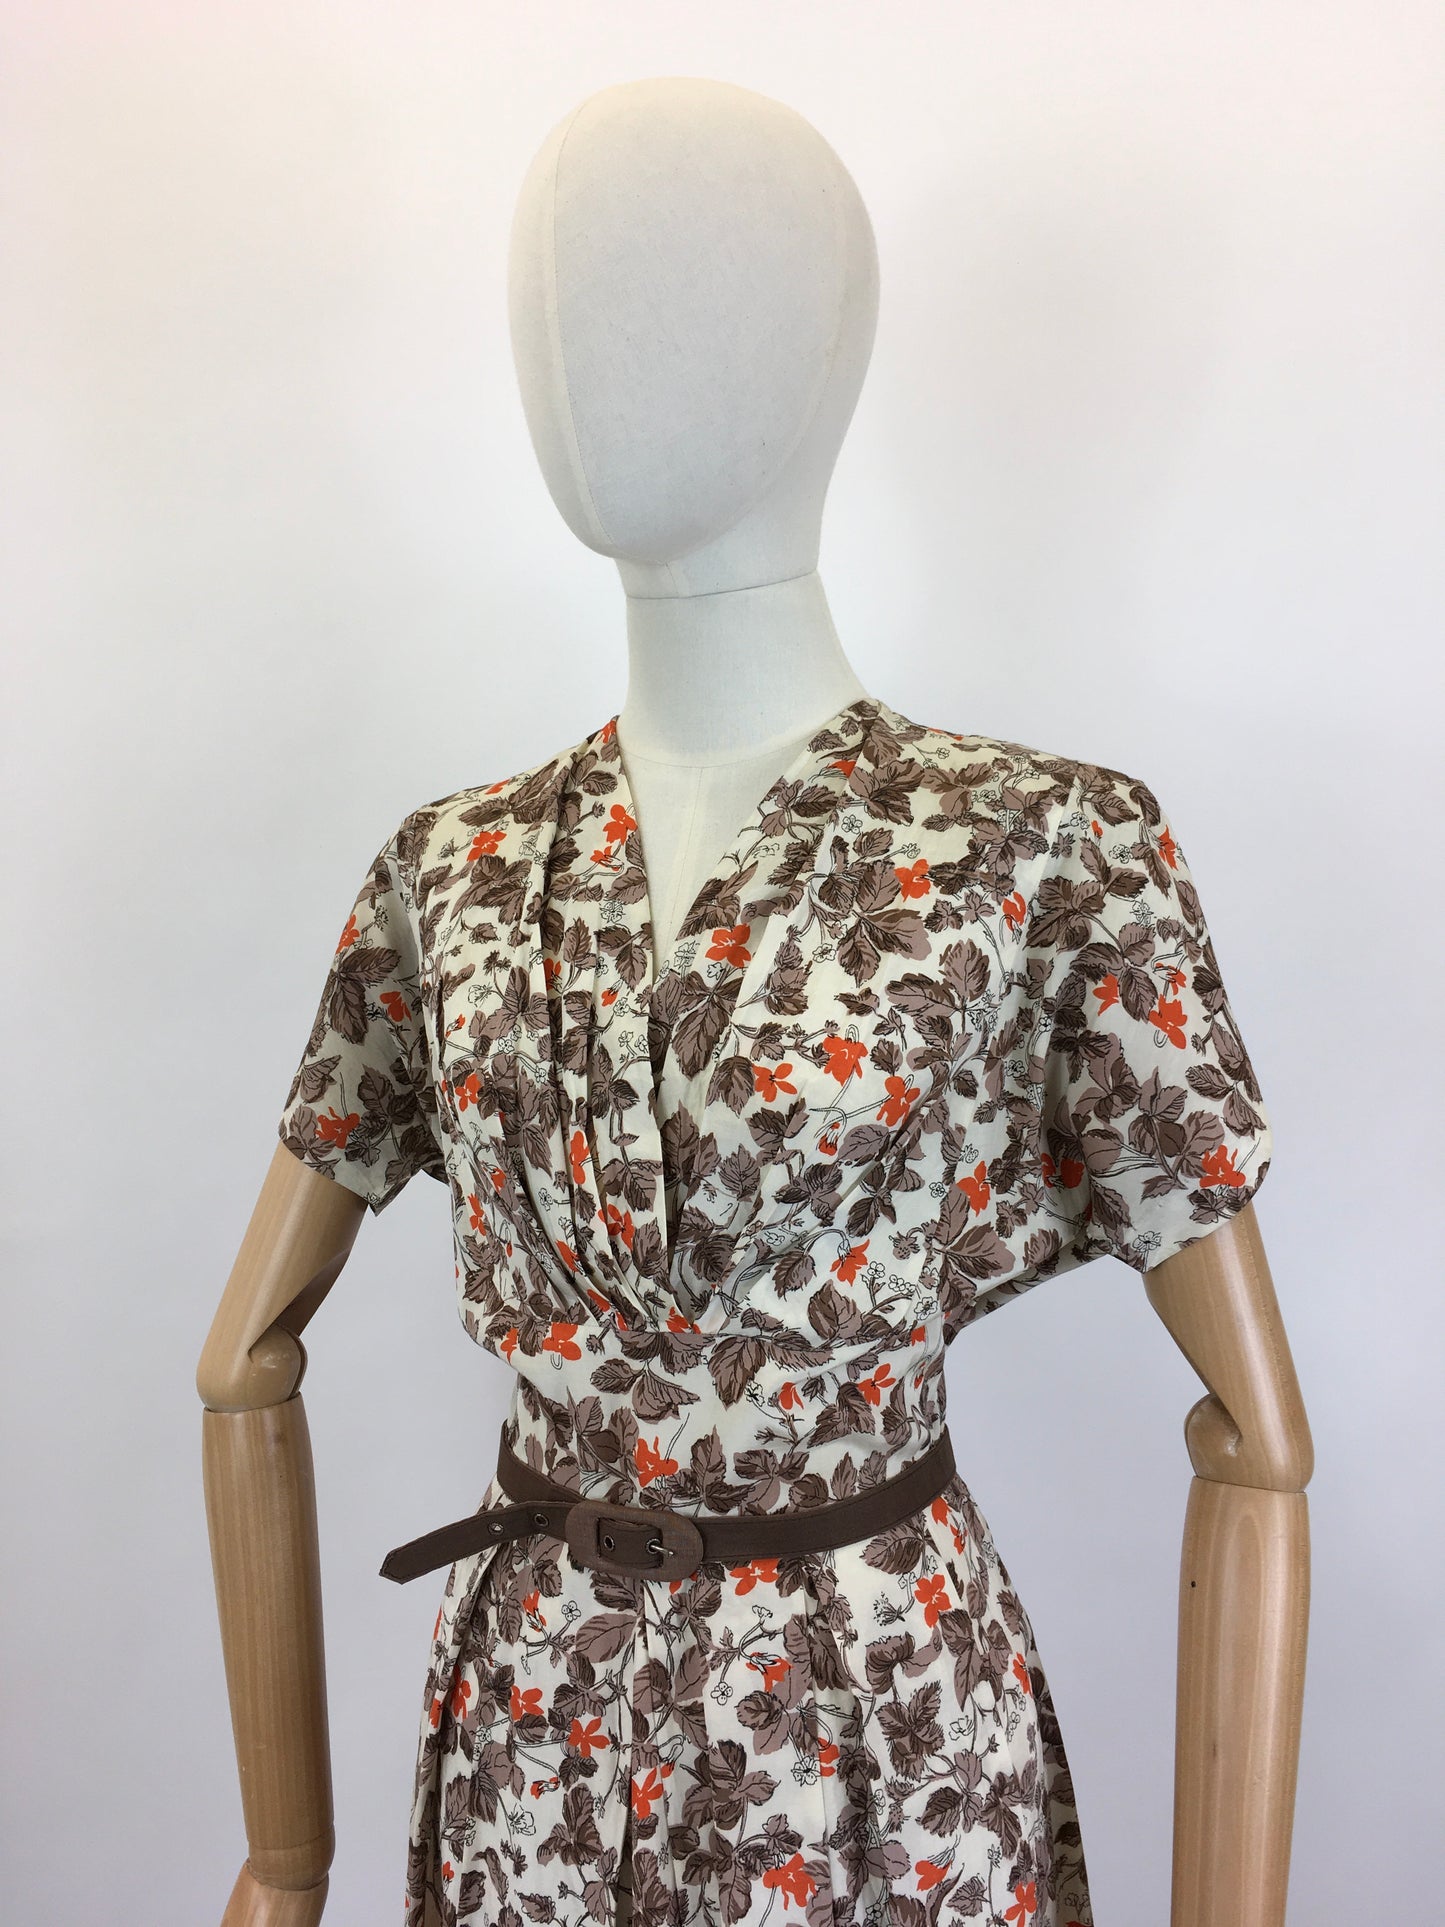 Original 1940's Beautiful Day Dress in Warm Browns, Rust & Cream - By ' Park Lane Frocks'